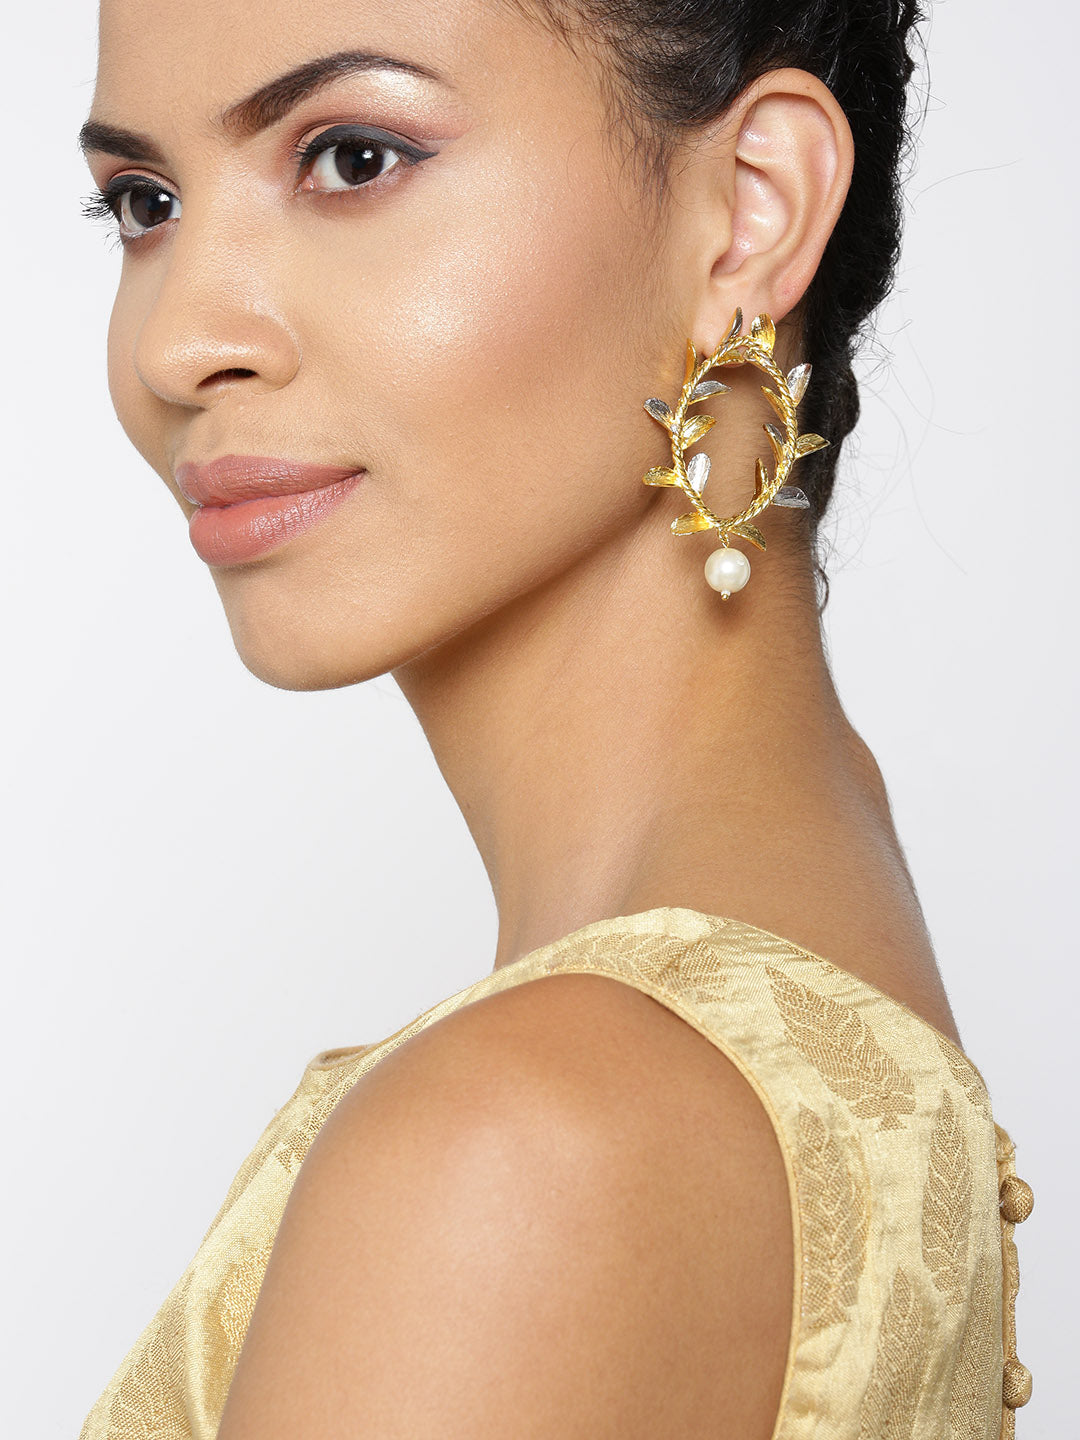 Gold And Silver-Plated Leaf Inspired Drop Earrings with Pearl Drop